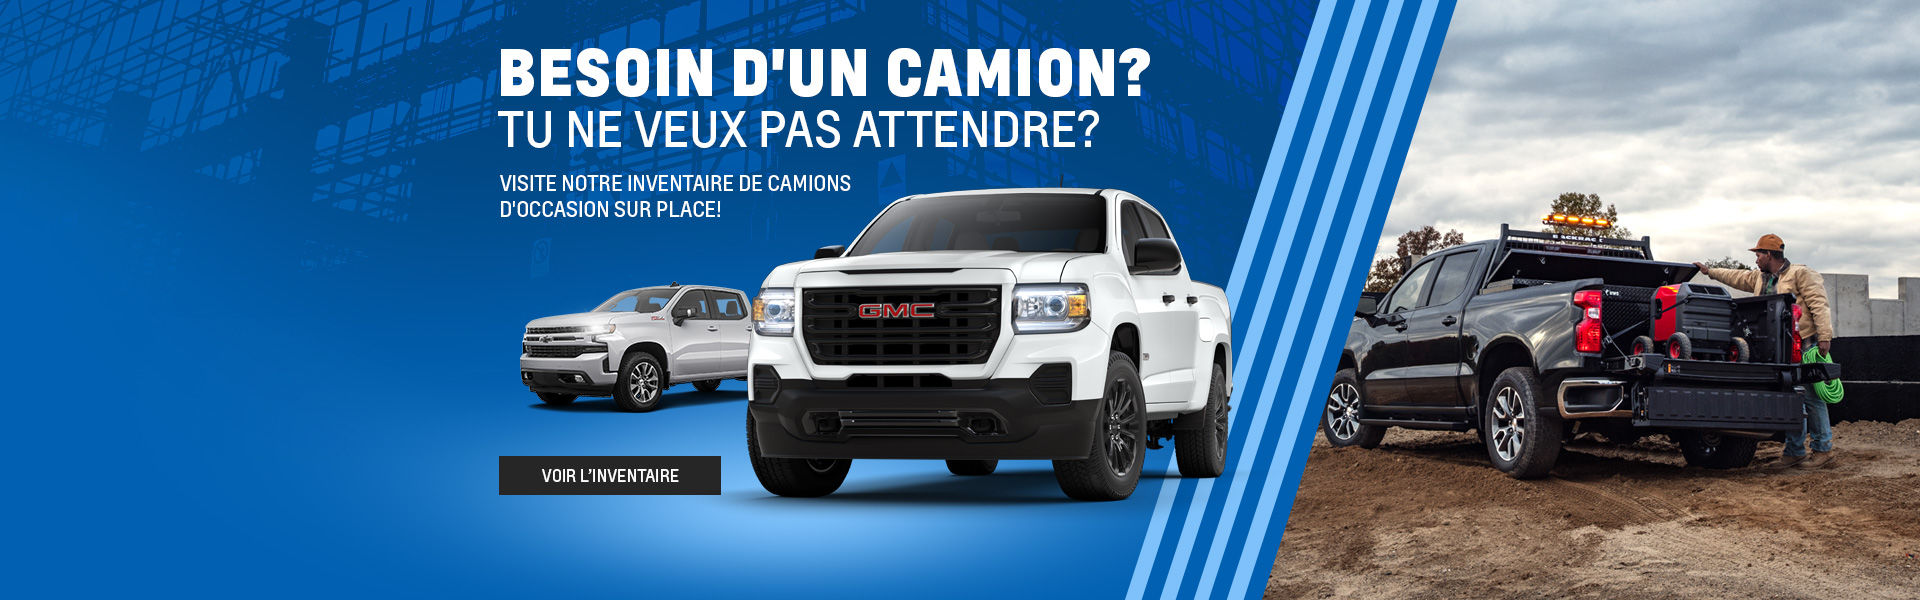 Camions d'occasion